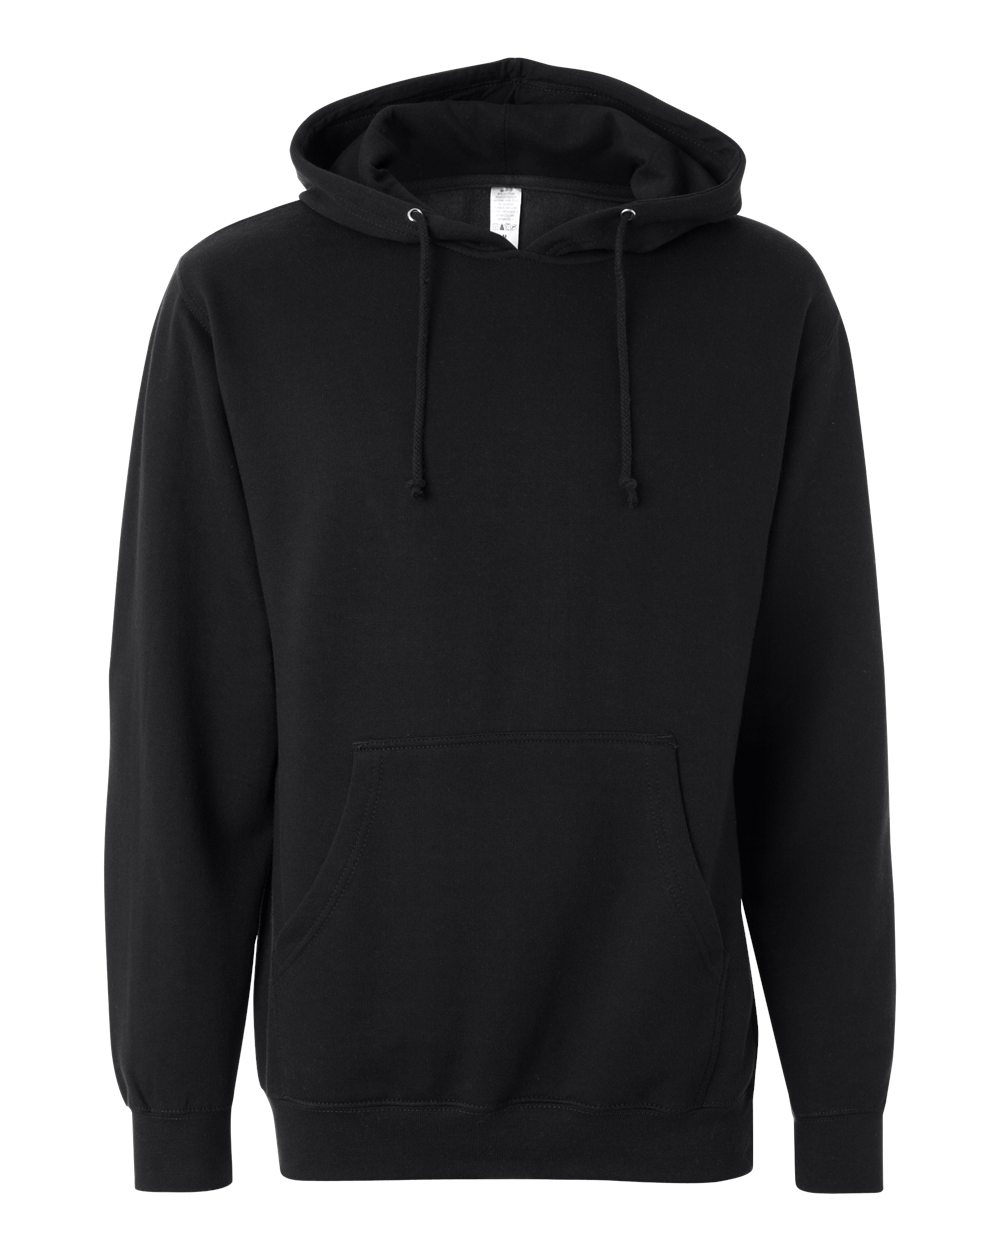 Independent Trading Co SS4500 - Midweight Hooded Sweatshirt